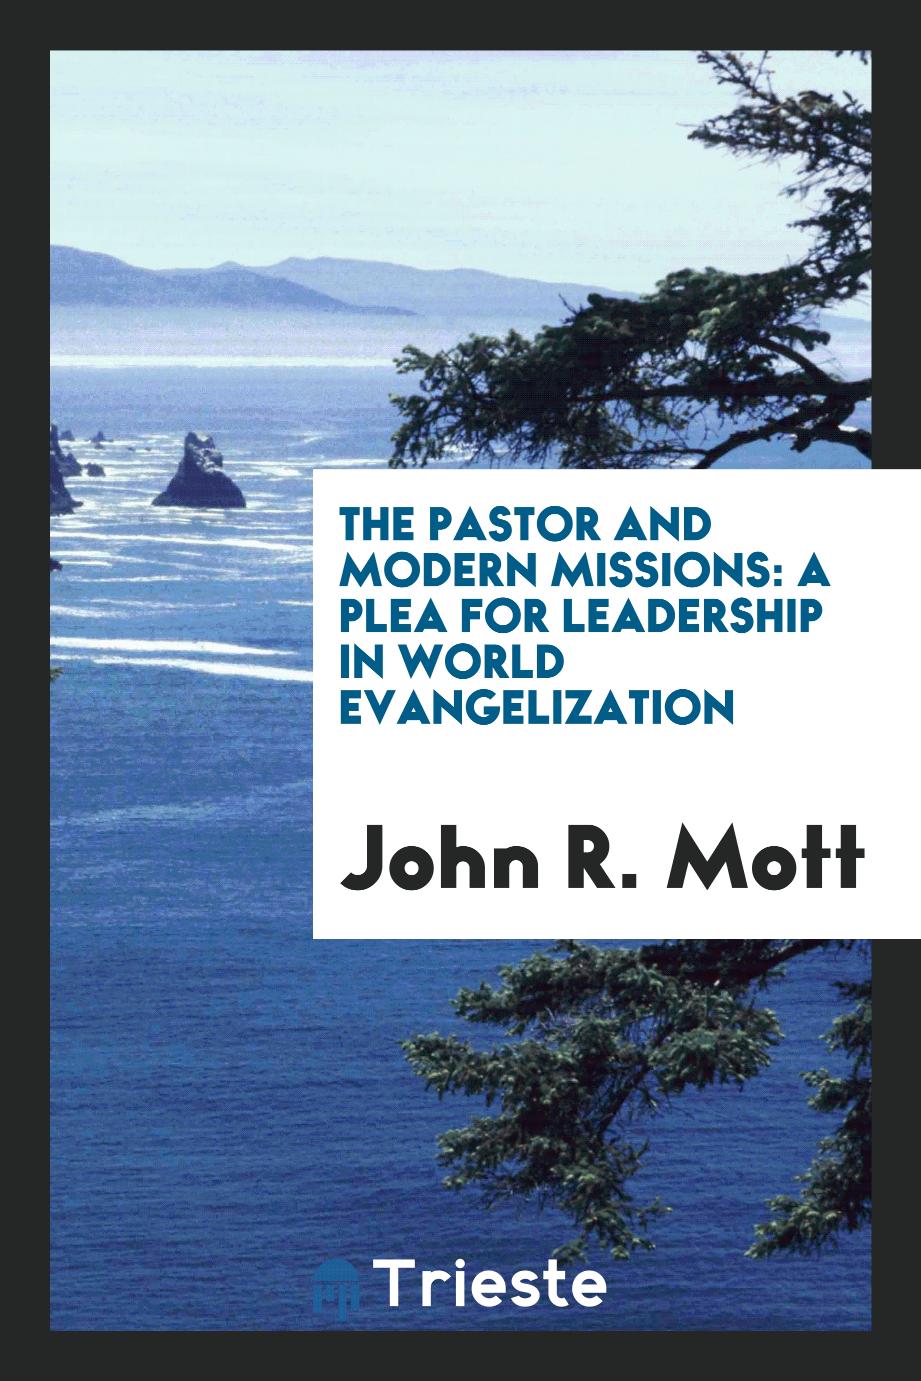 The Pastor and Modern Missions: A Plea for Leadership in World Evangelization